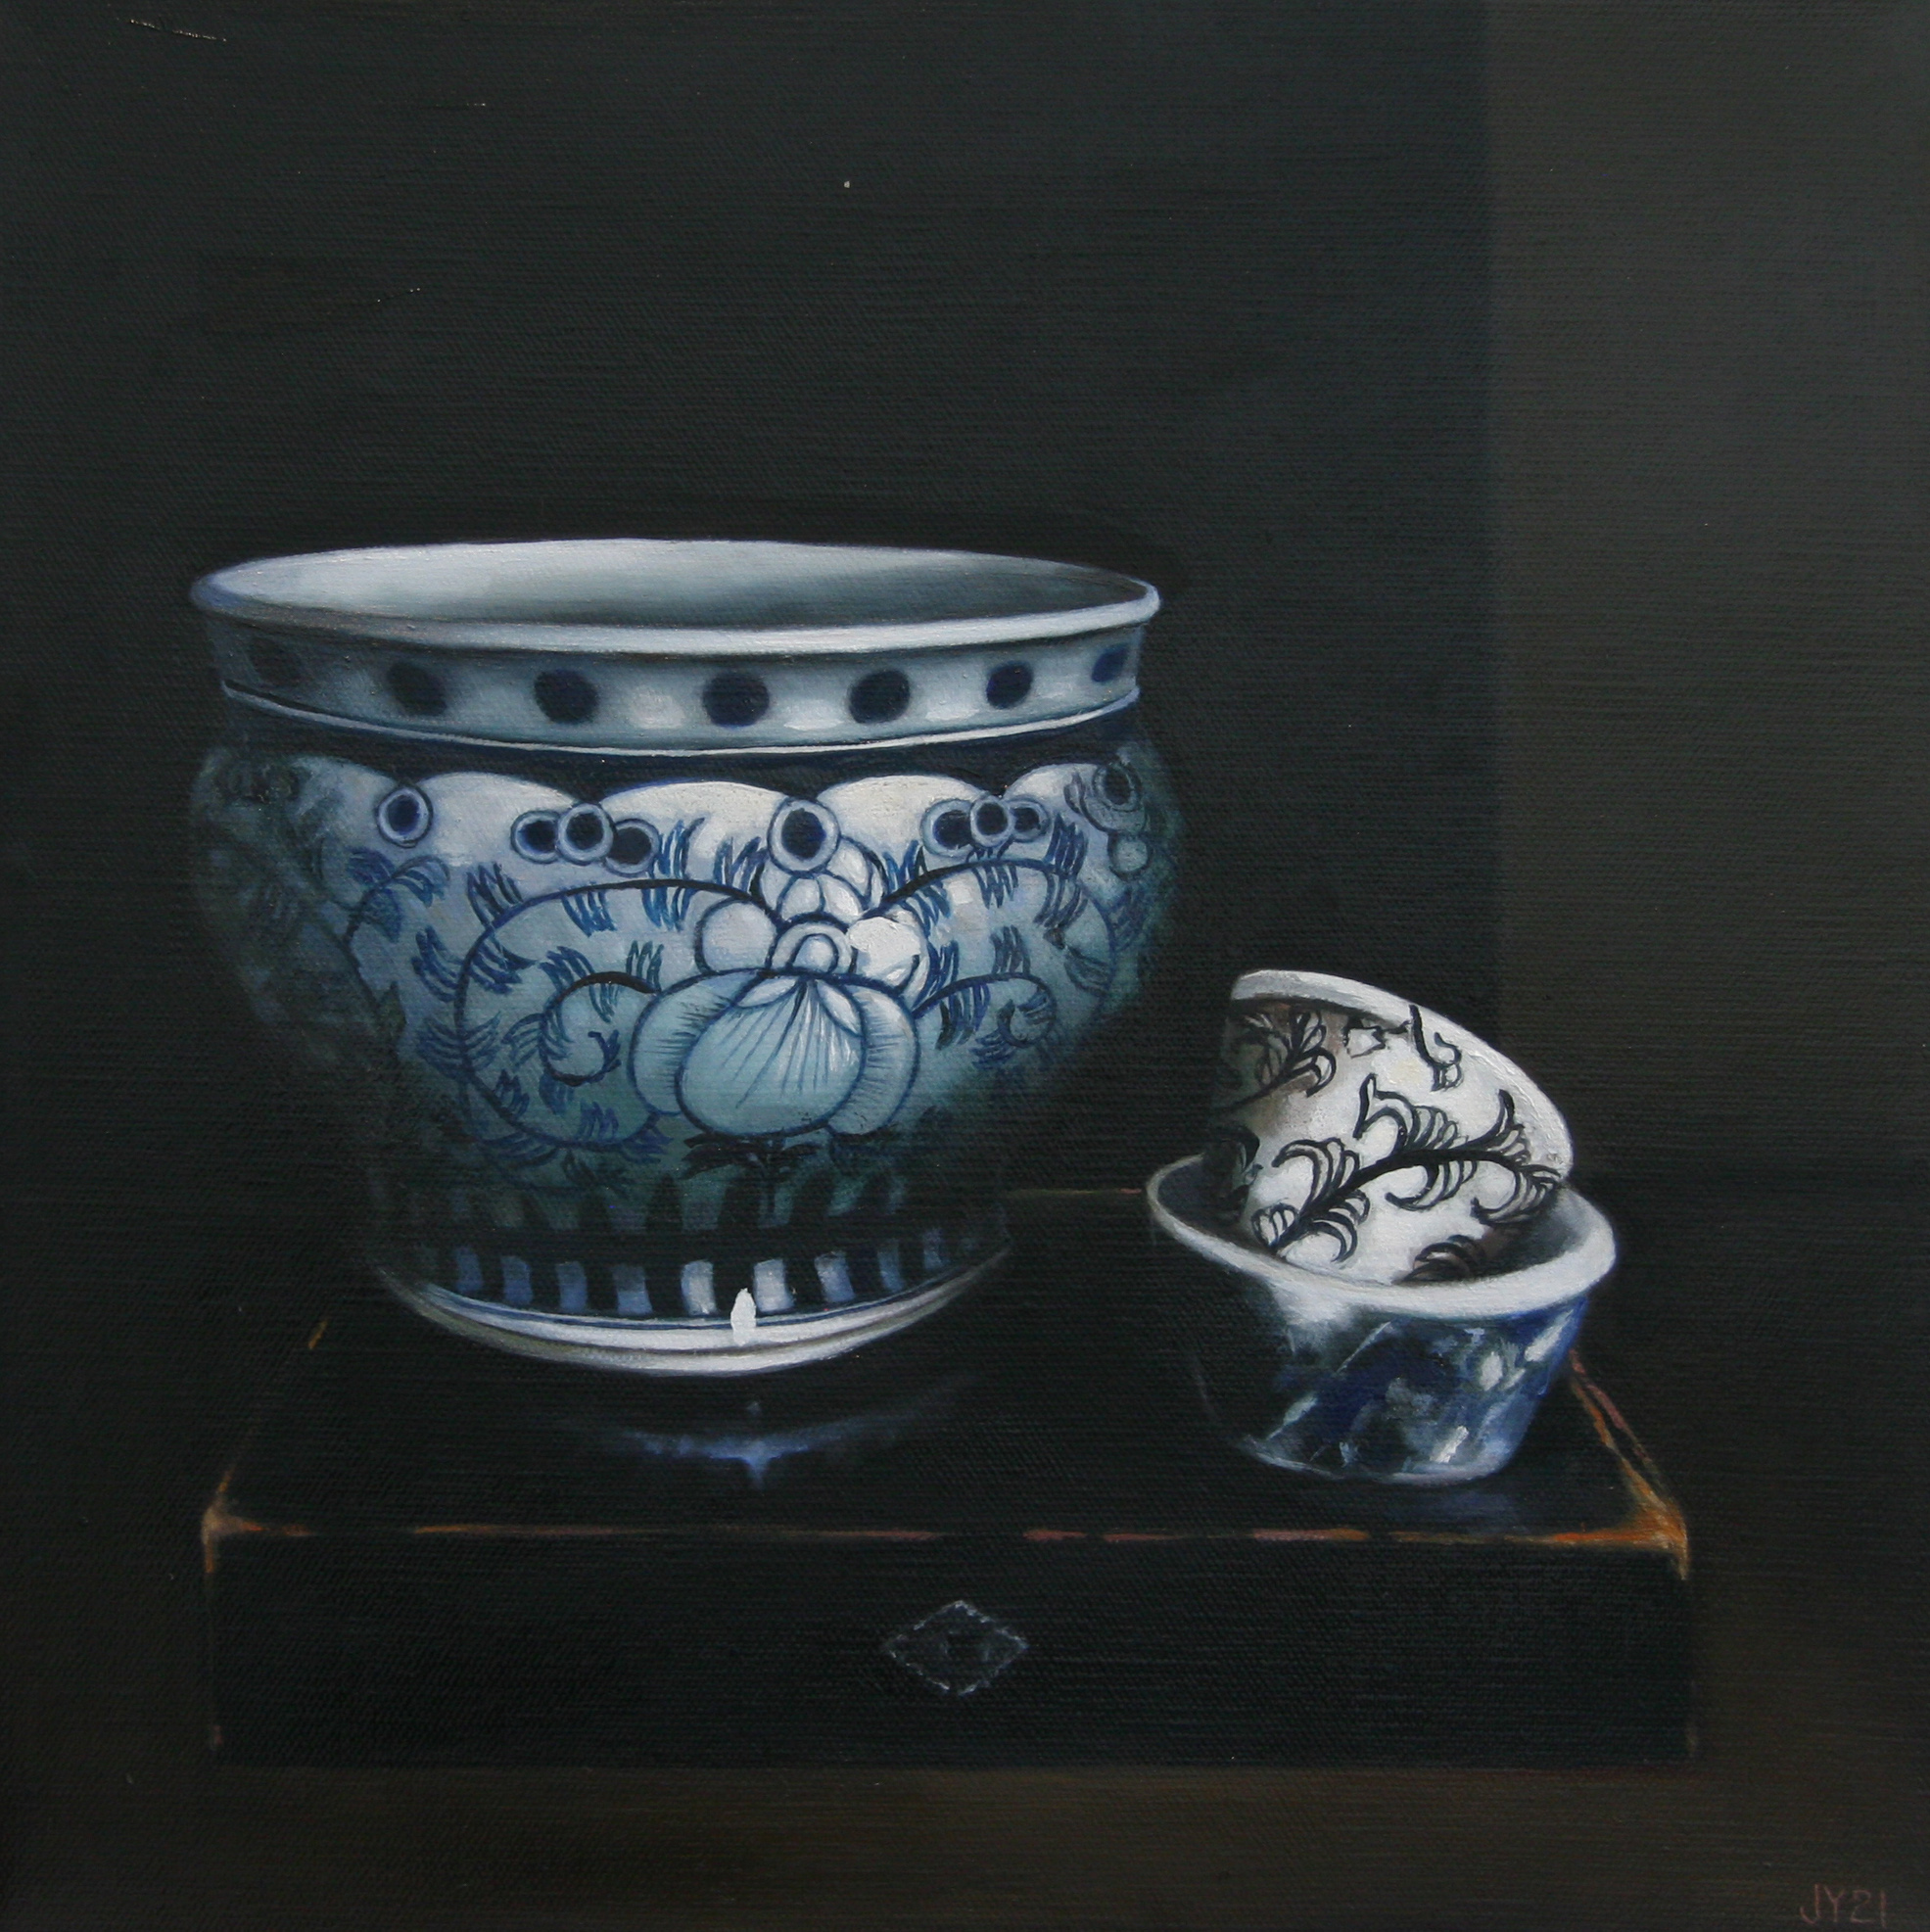 Young_Vessel Entwined No 1_oil on linen_40 x 40cm